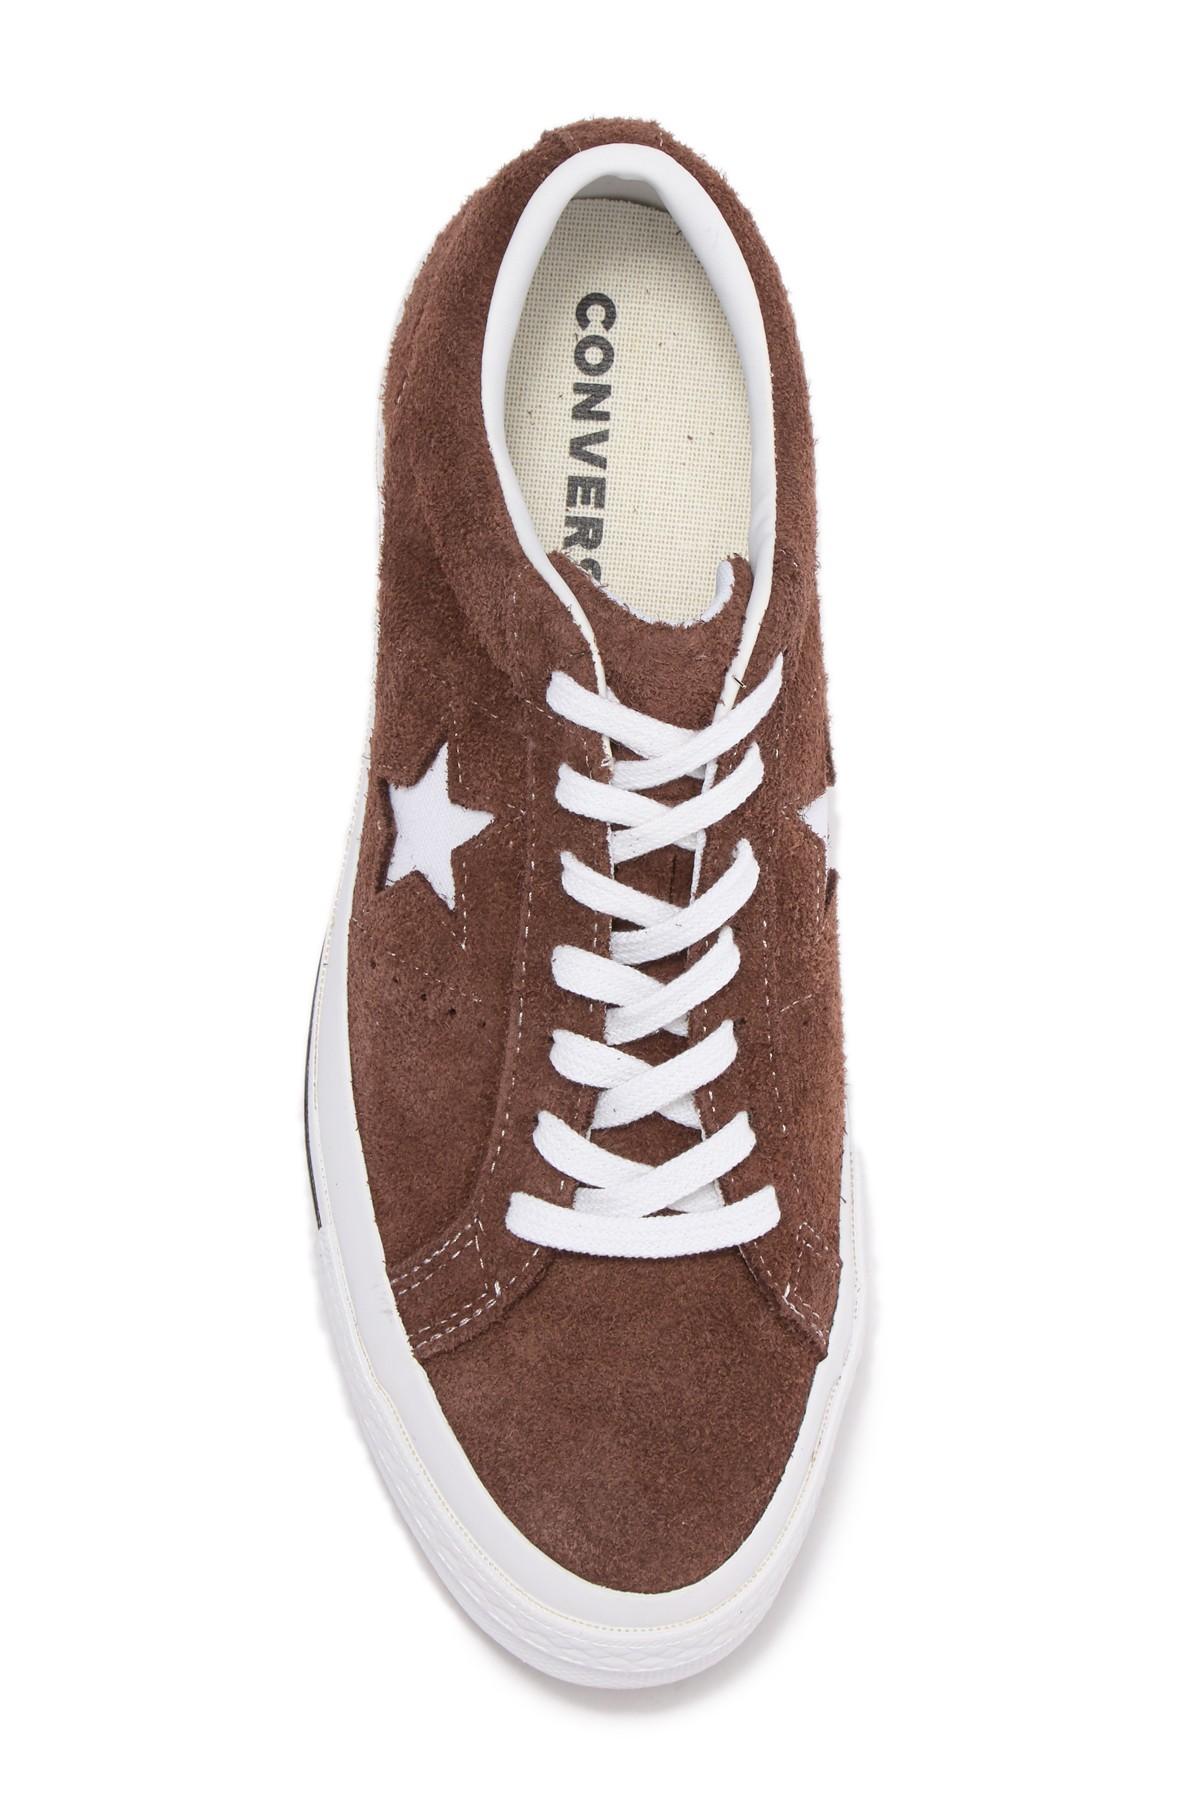 Converse One Star Oxford Sneaker (unisex) in (Brown) for -